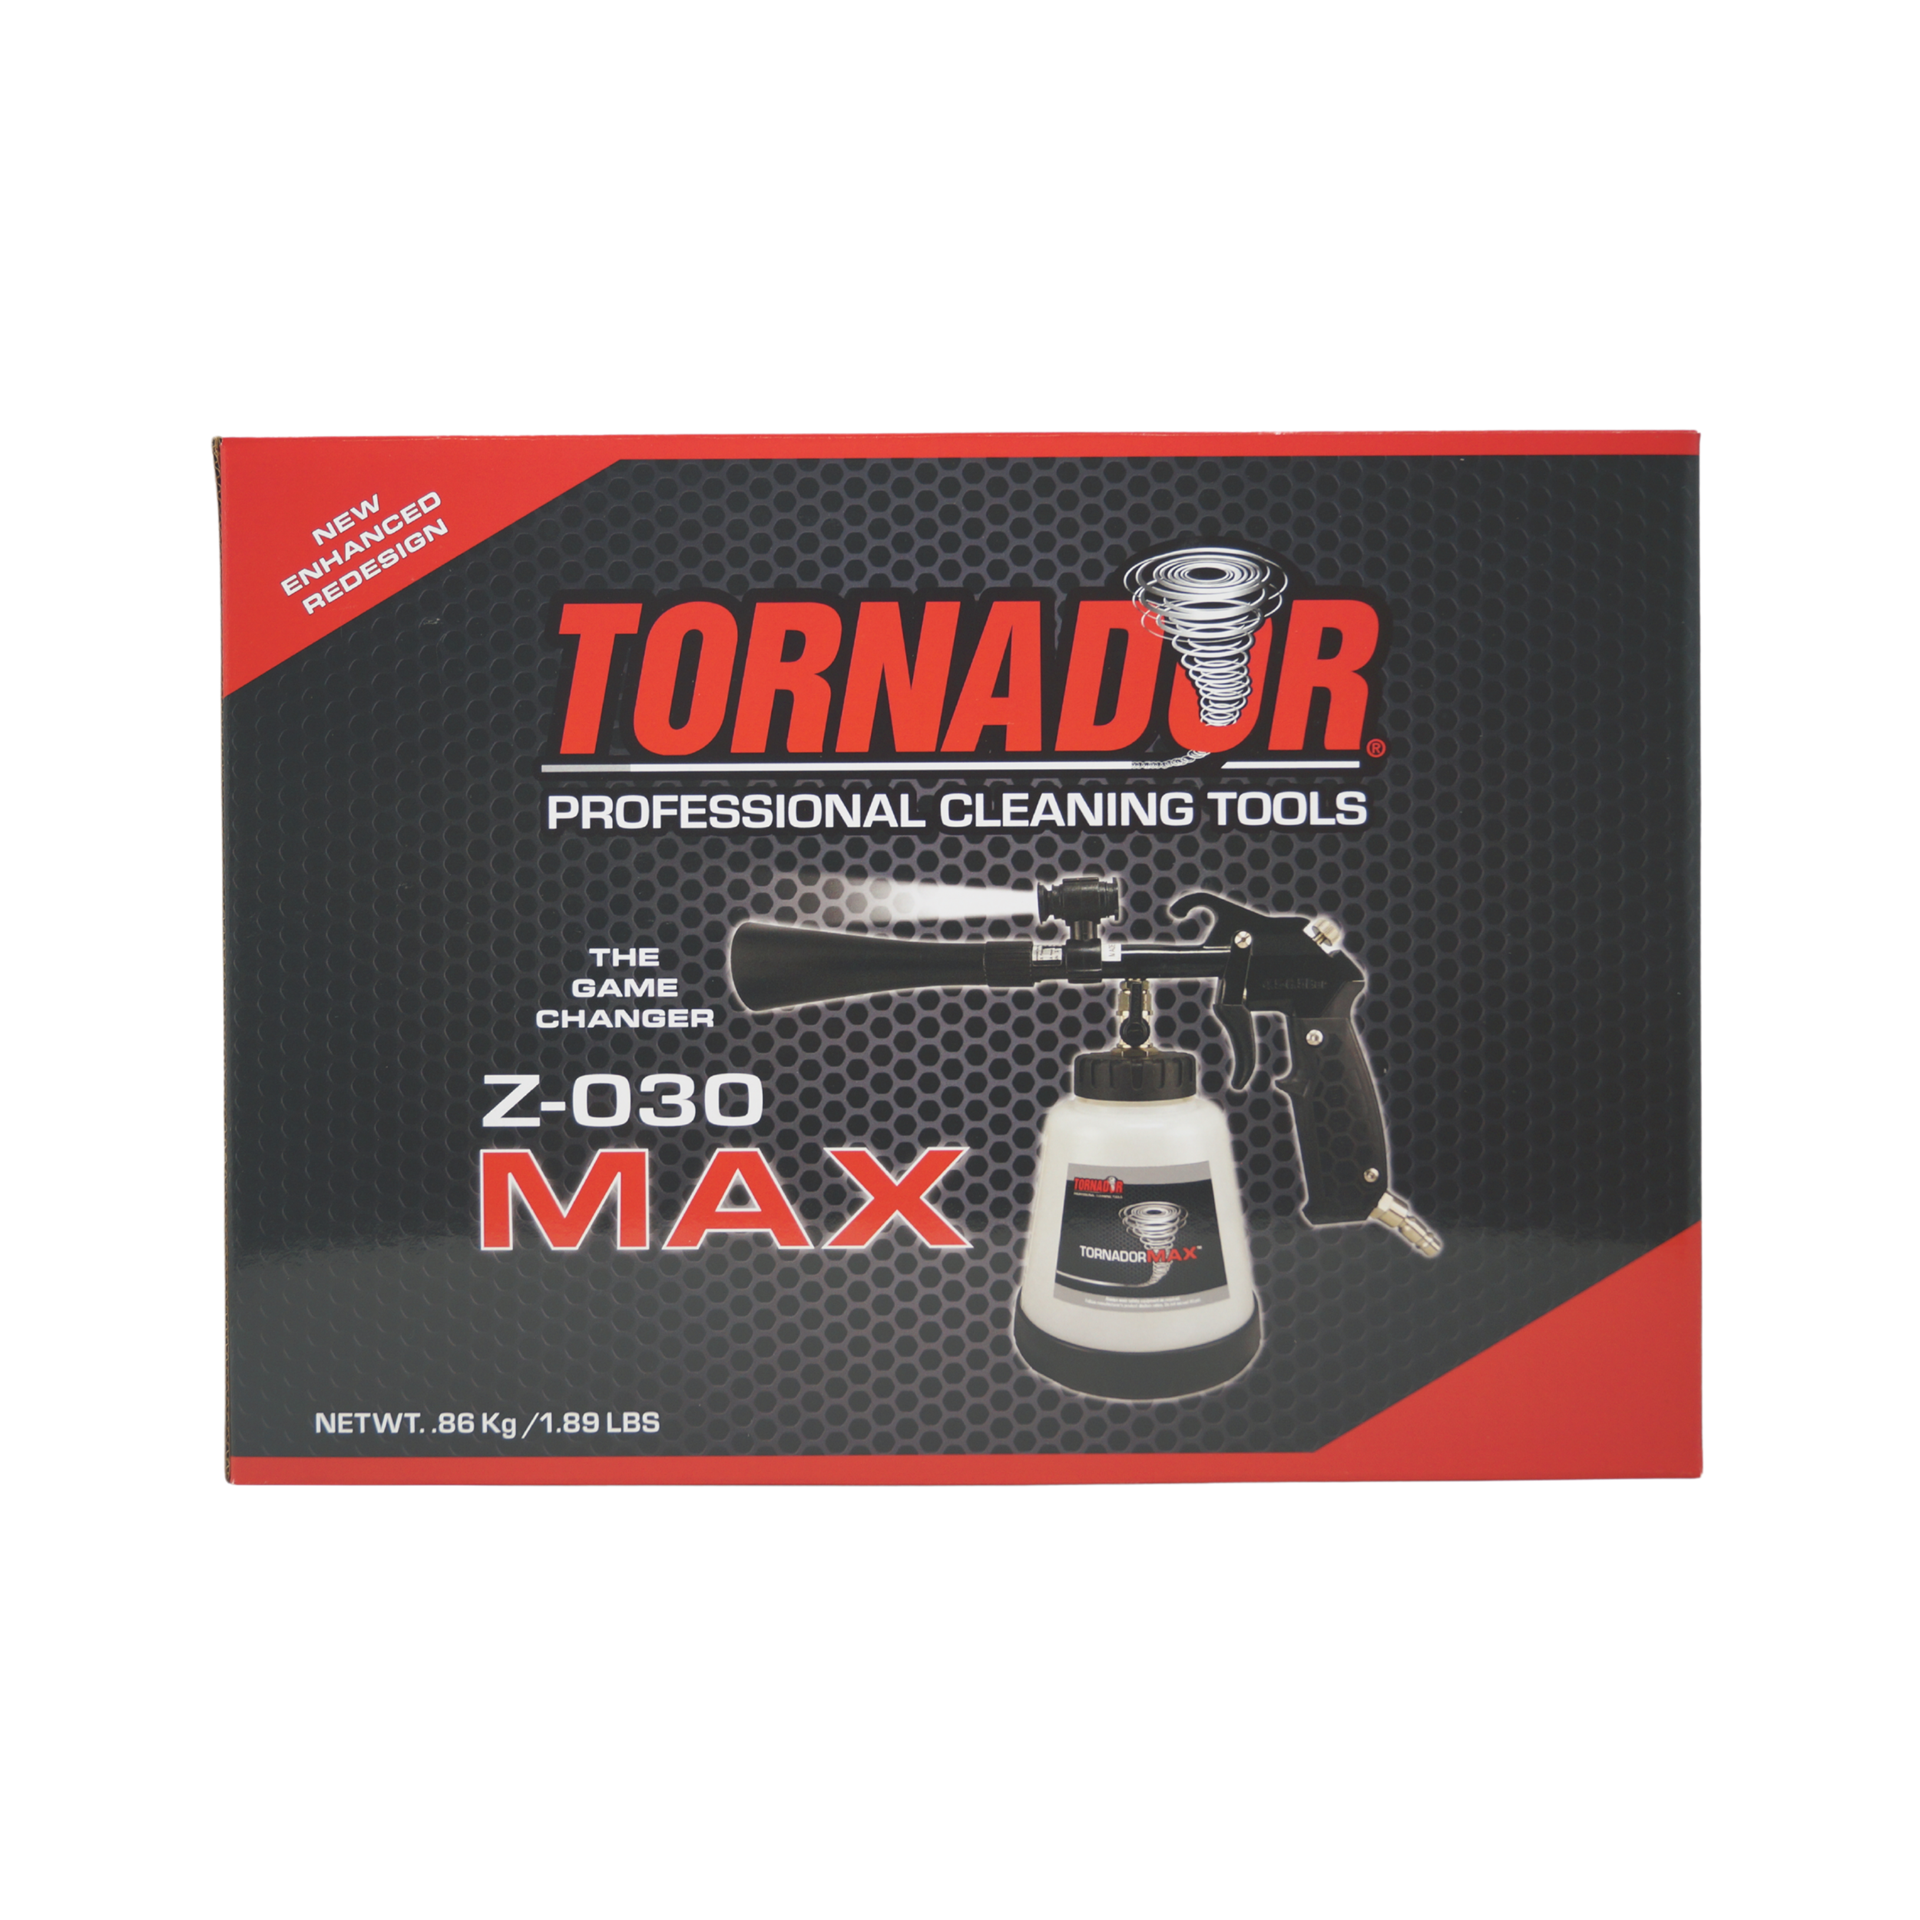 The Tornador Car Cleaning gun is a game changer for interior